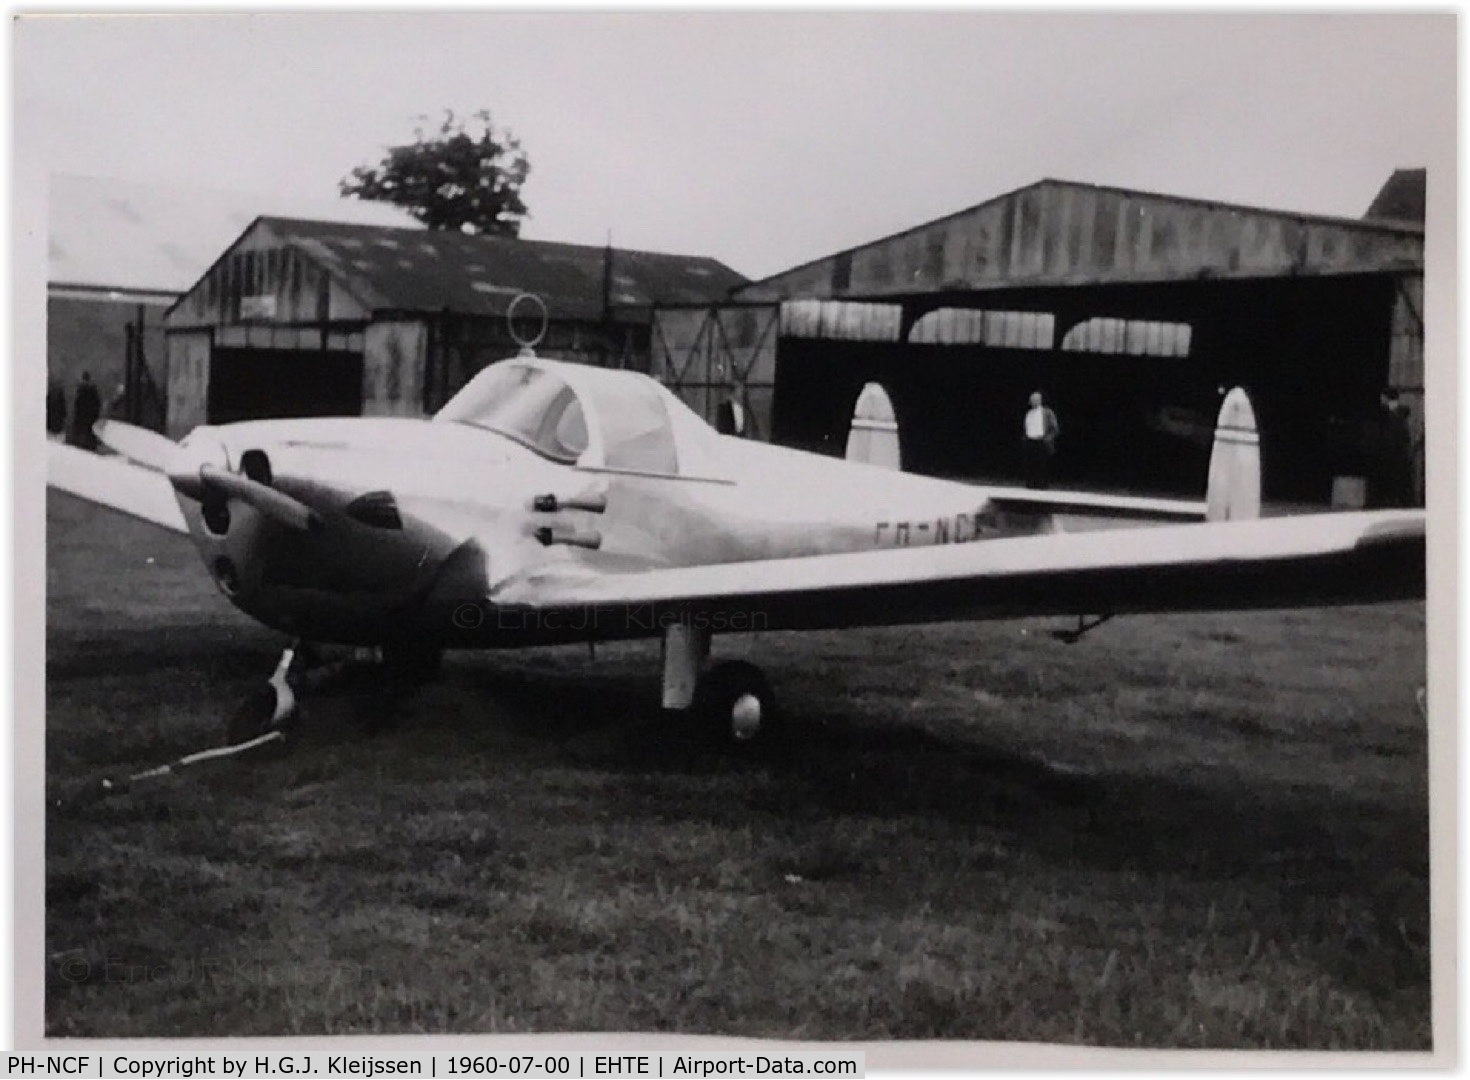 PH-NCF, 1947 Erco 415C Ercoupe C/N 4754, 1960, July. Airport Teuge